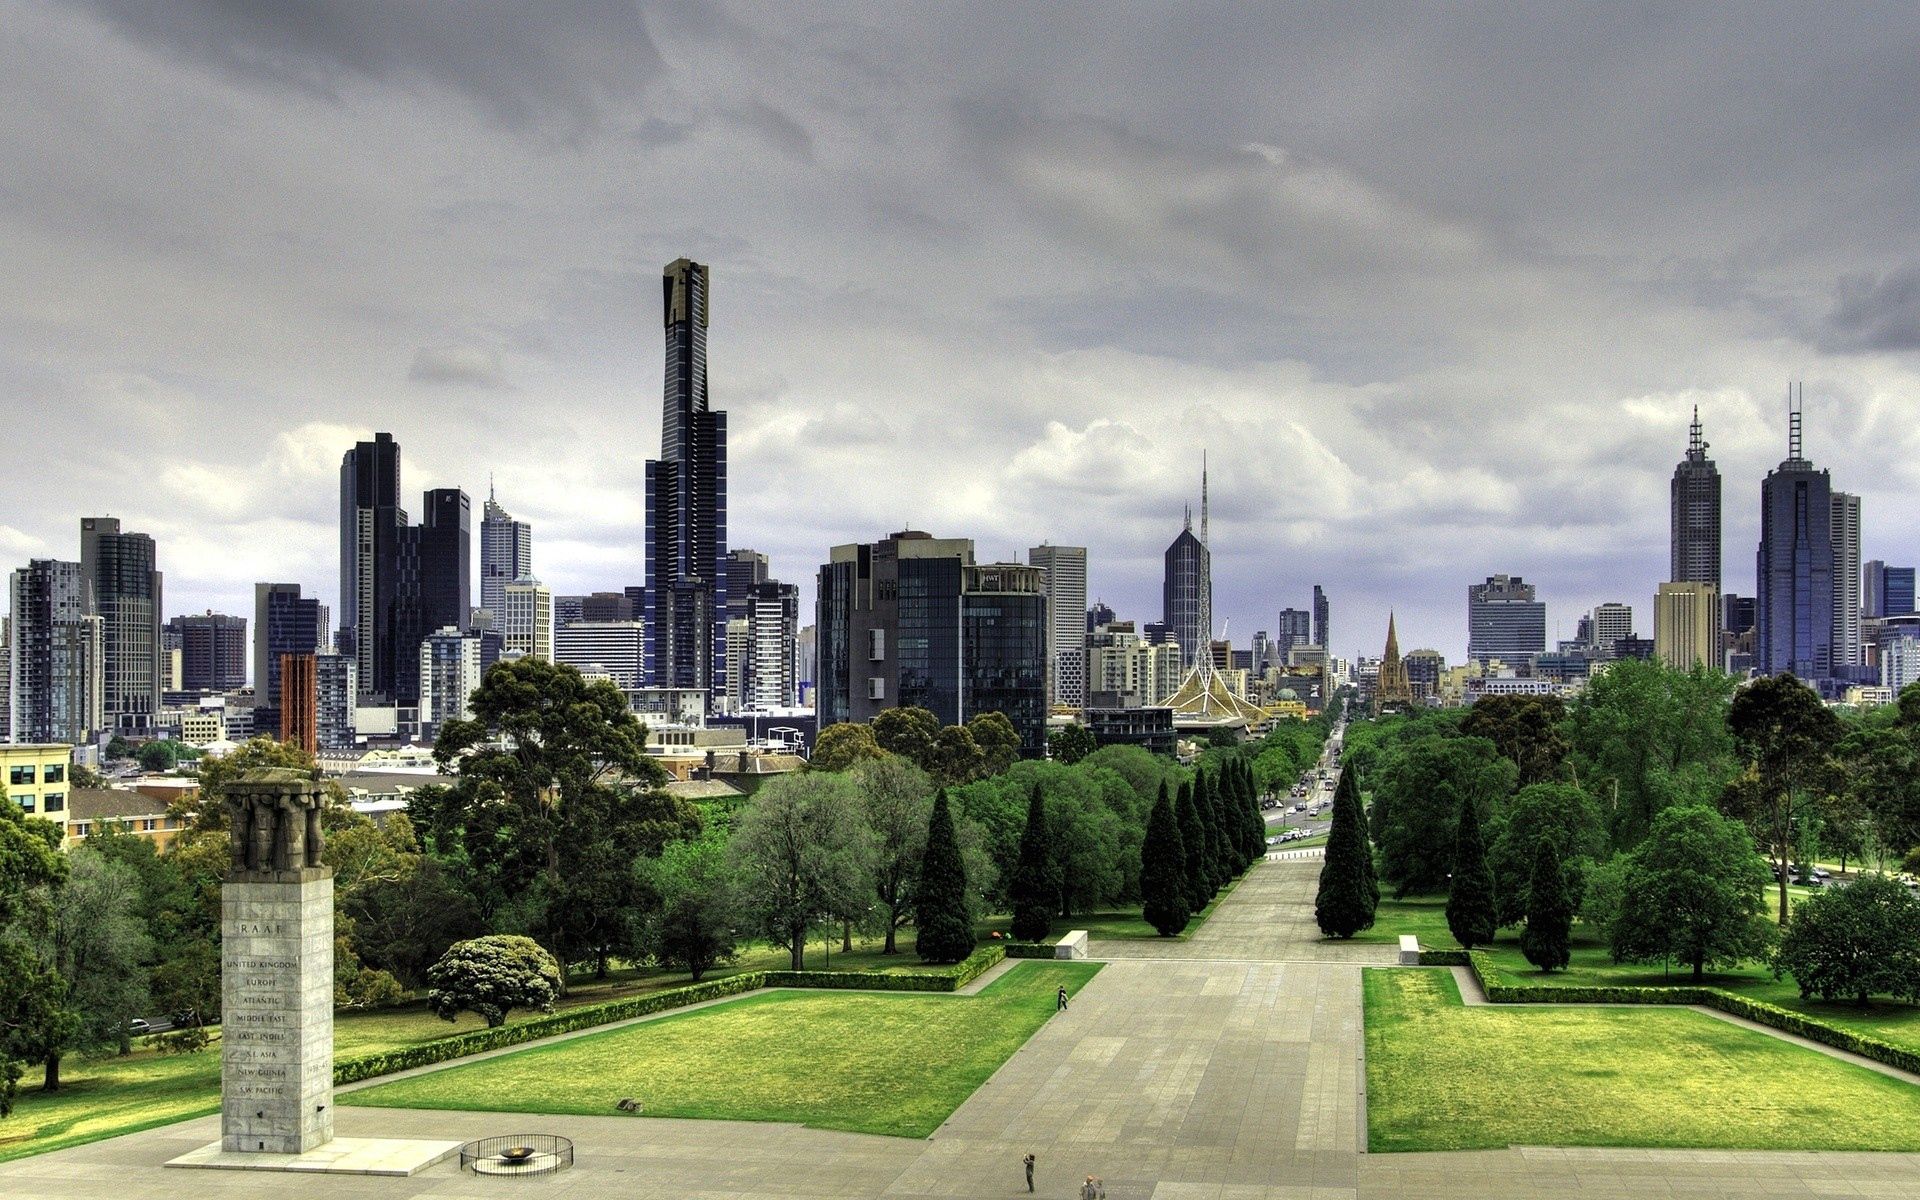 australia, cities, handsomely, nature, building, park, skyscrapers, stroll, it's beautiful, melbourne High Definition image